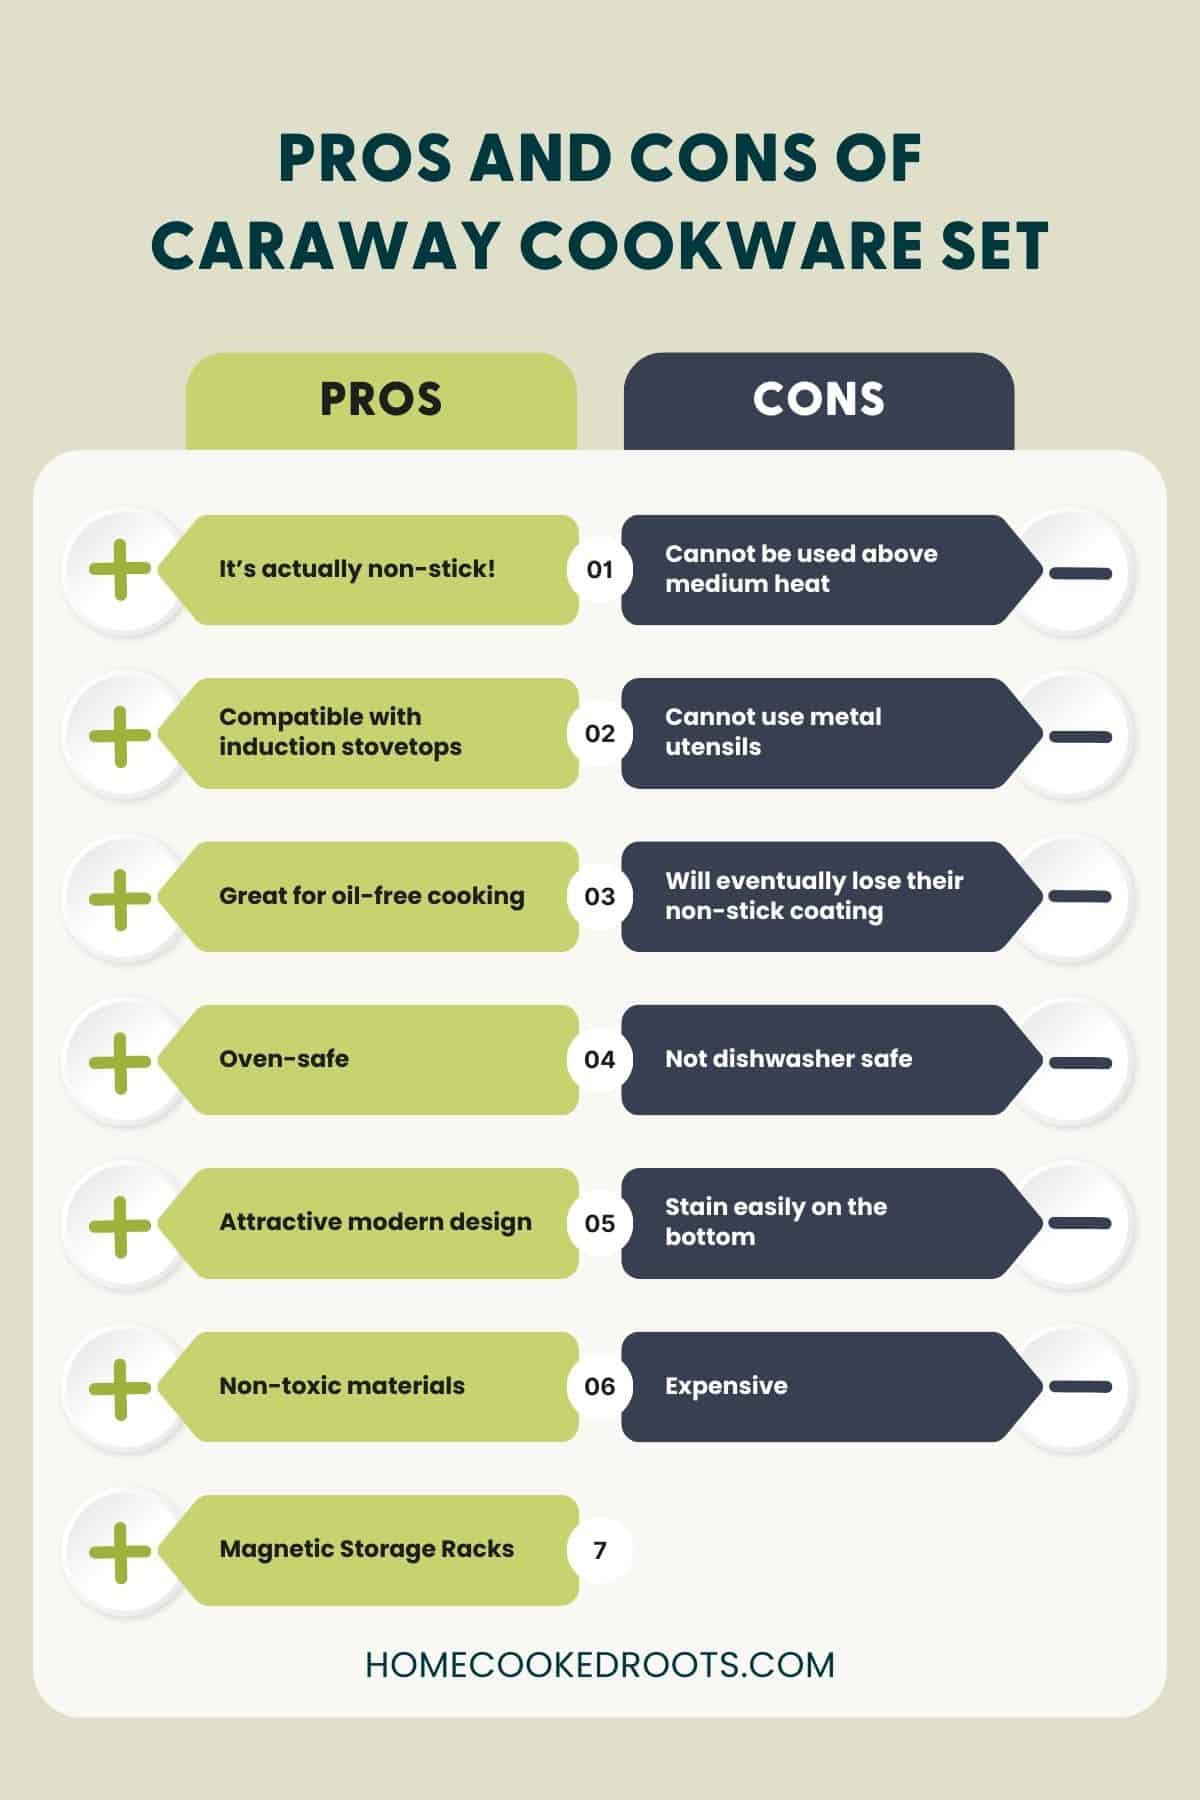 Pros and cons graphic of Caraway cookware set.